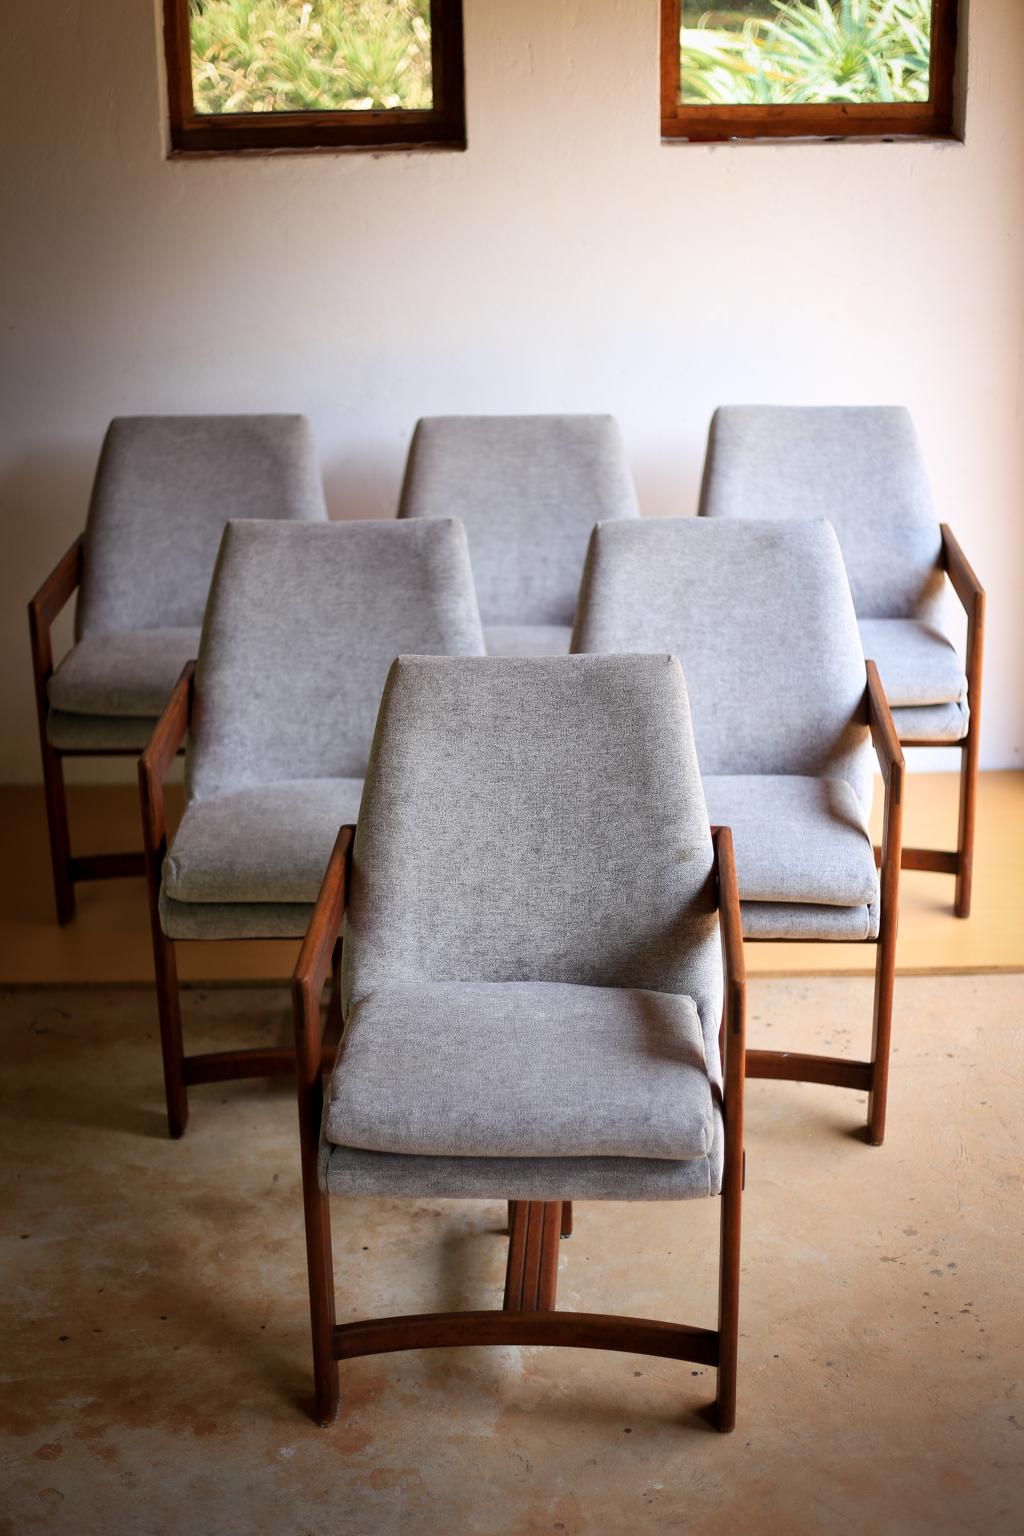 A set of six cubist African teak (kiaat wood) dining chairs designed and made in the 1960s in South Africa. The unique, strong three-legged frame supports a tub type seat with an angled back rest and loose seat cushion, upholstered in a light grey,